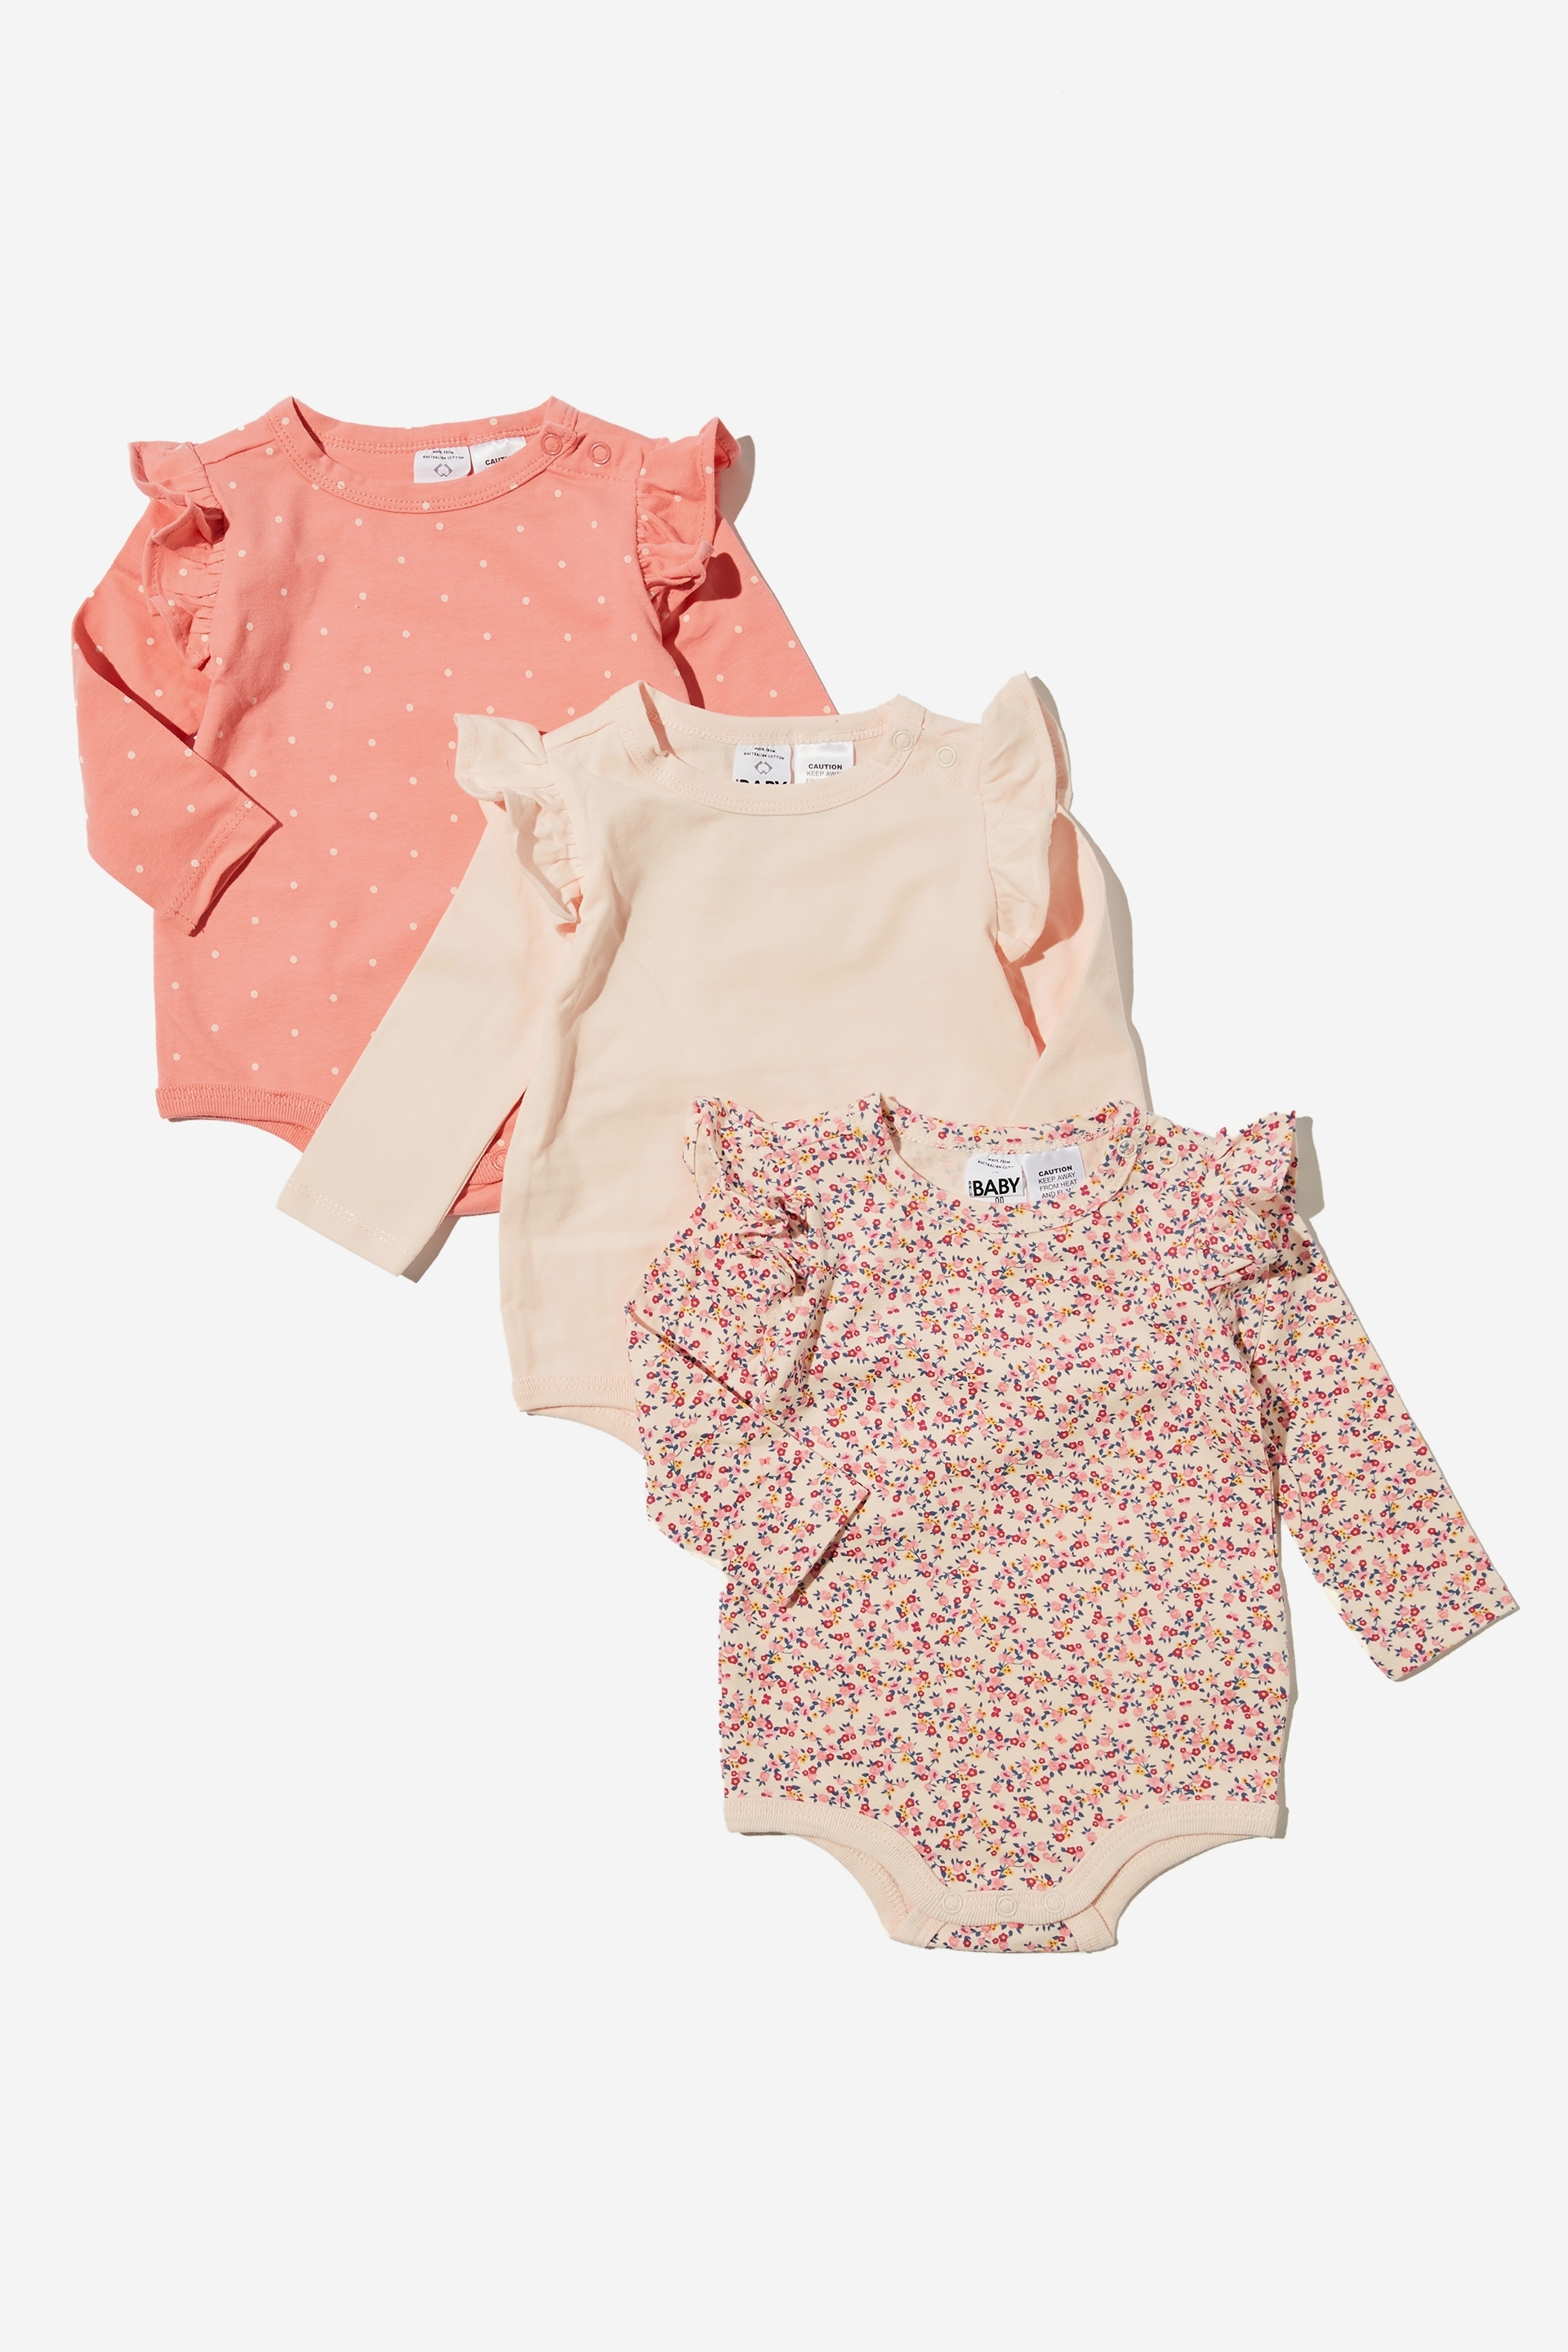 Cotton On Kids - 3 Pack Long Sleeve Ruffle Bubbysuits - Somerset floral/betty spot/crystal pink